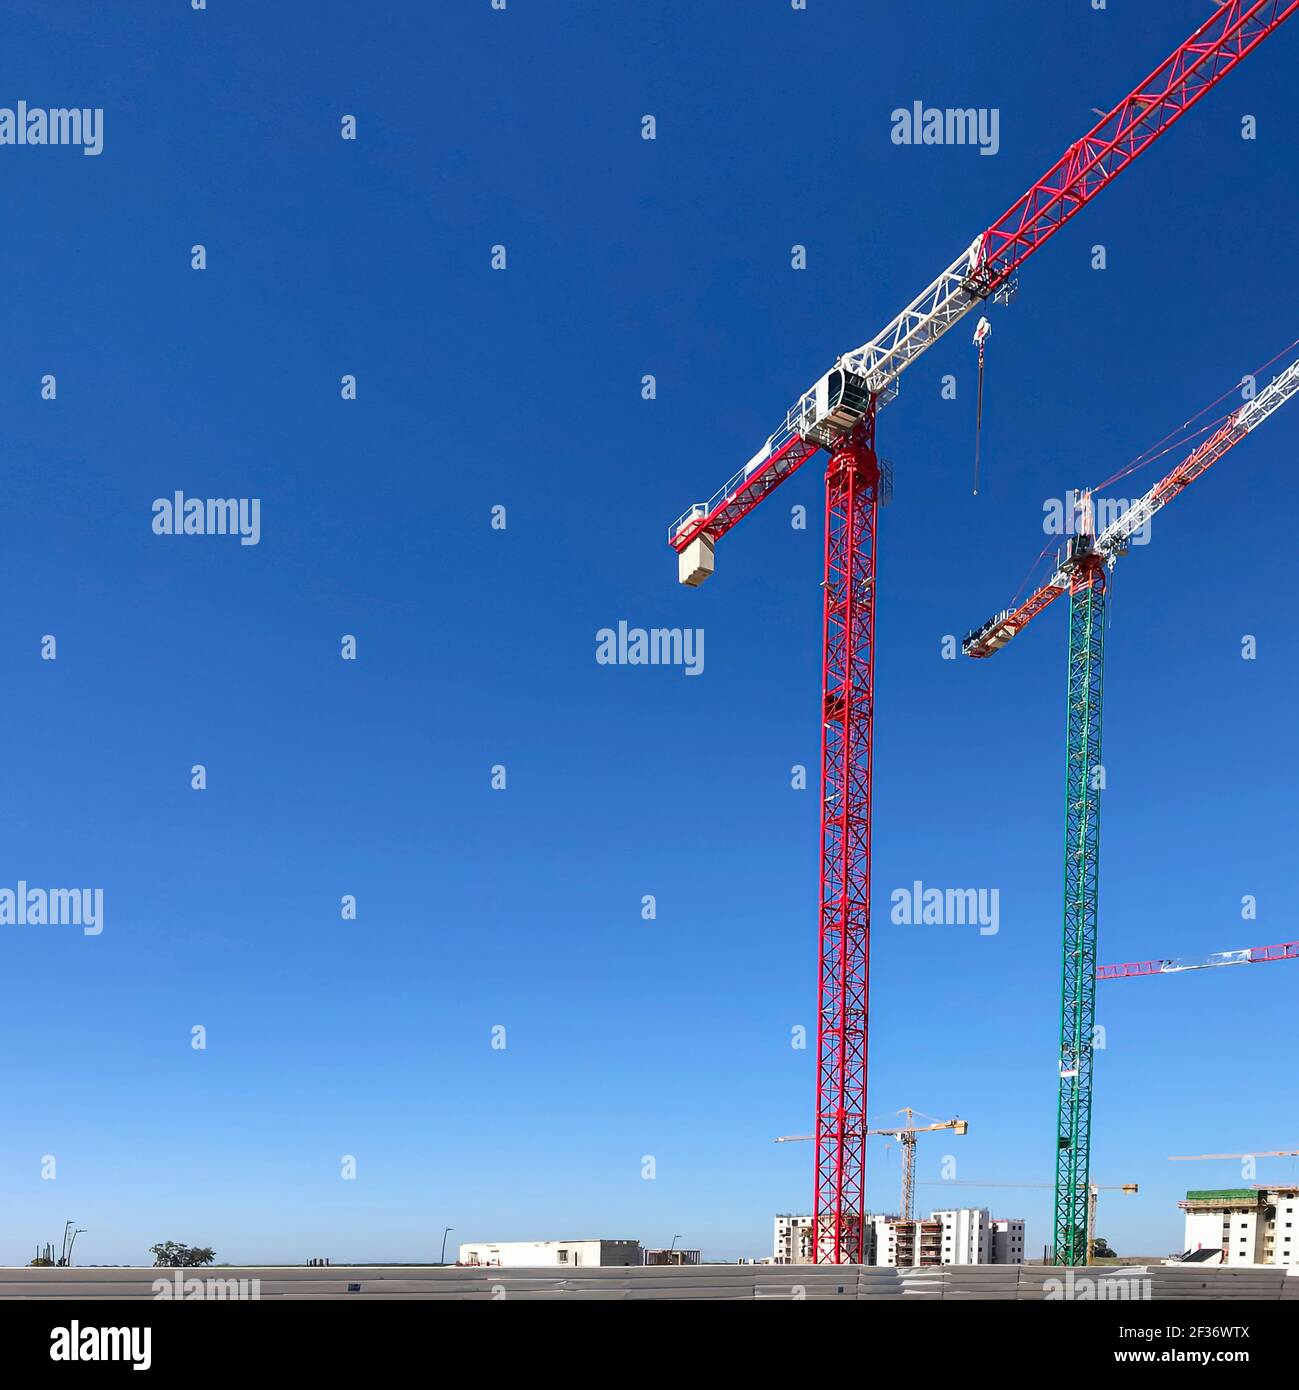 Constraction cranes on the blu sky background. Stock Photo